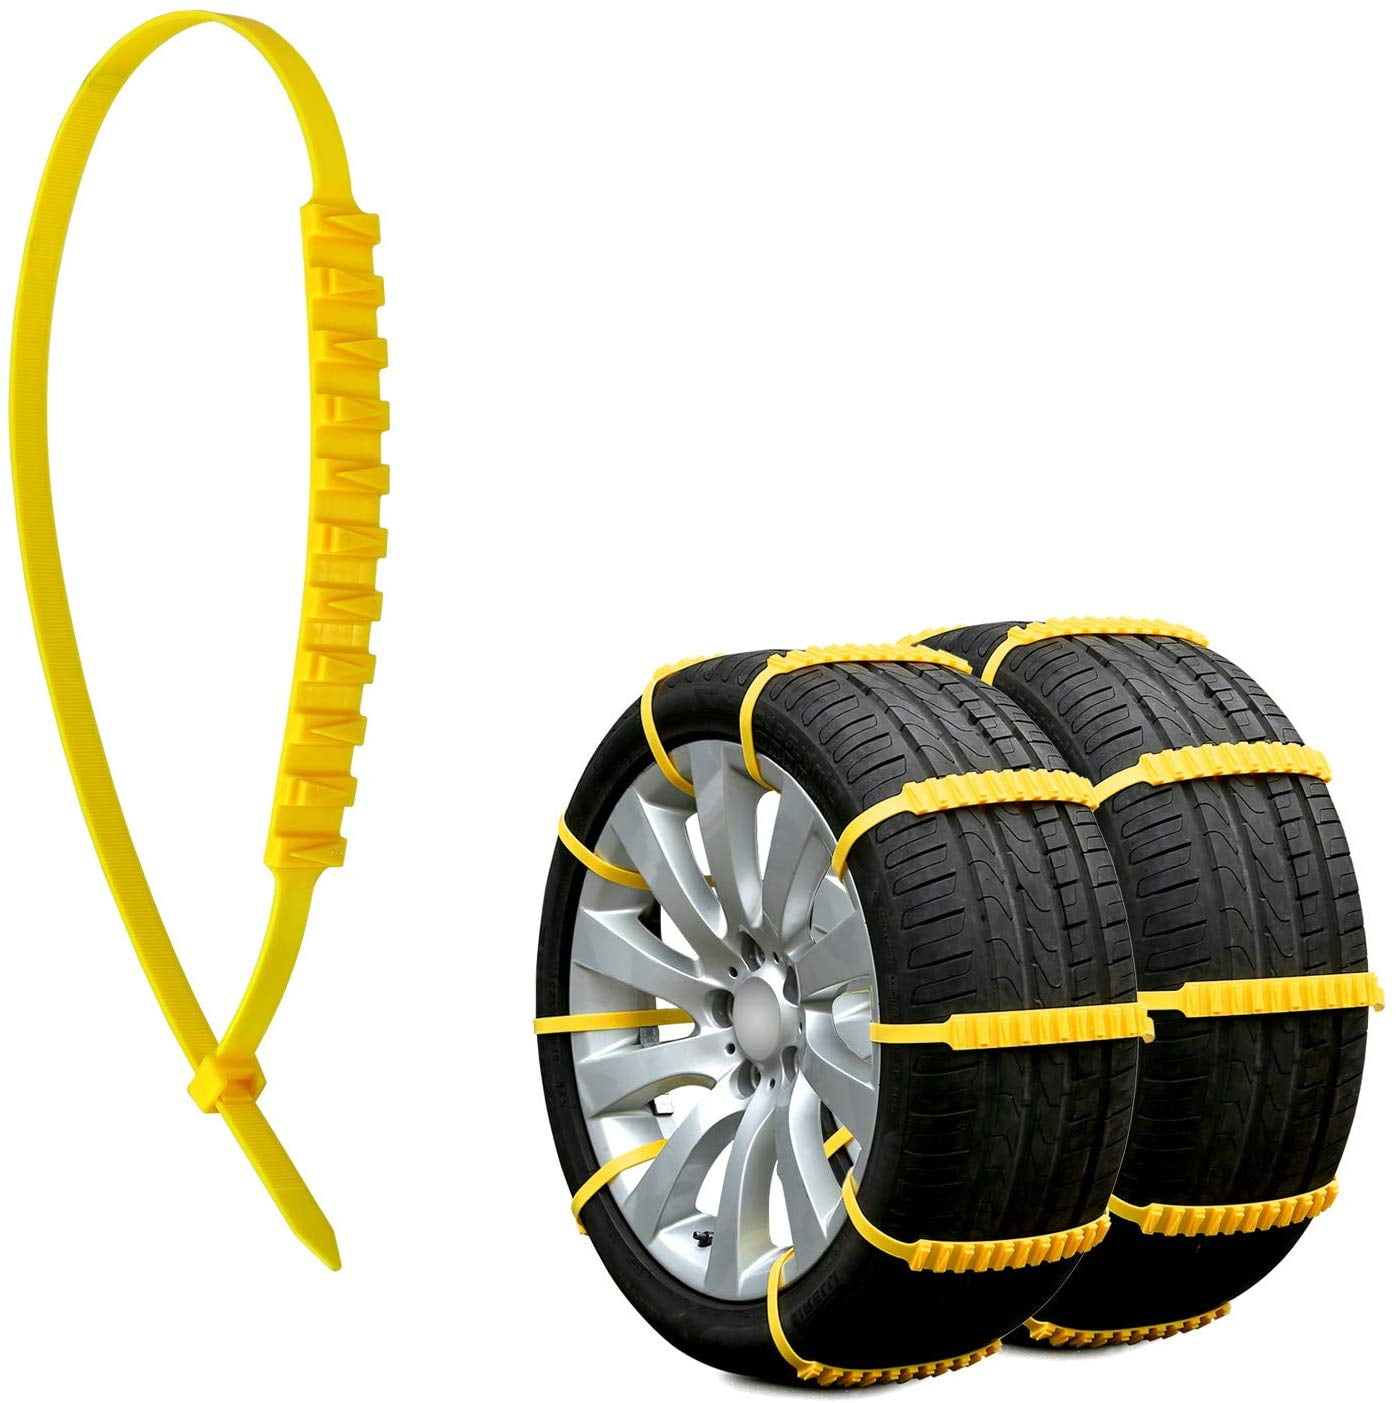 Snow Chains for Cars Anti-Skid Emergency Snow Tire Chains Portable Emergency Traction Anti Slip Tire Chains Snow Mud Chains Universal Adjustable 10pcs Car Security Chains for SUV and Cars Yellow A 